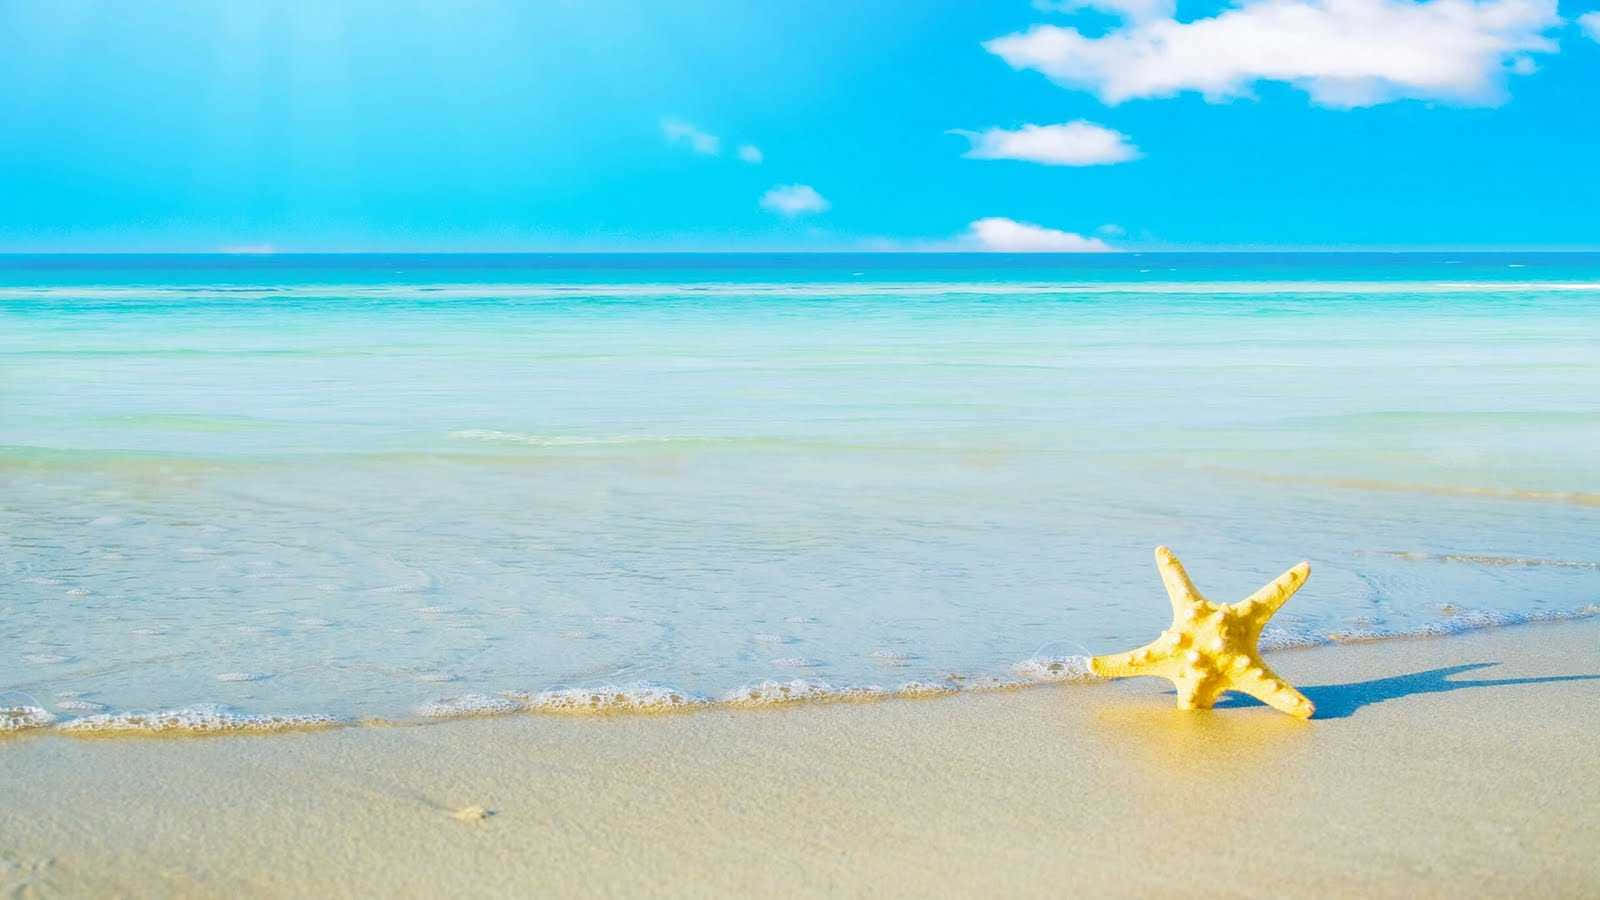 A starfish on the beach with the ocean in the background - Starfish